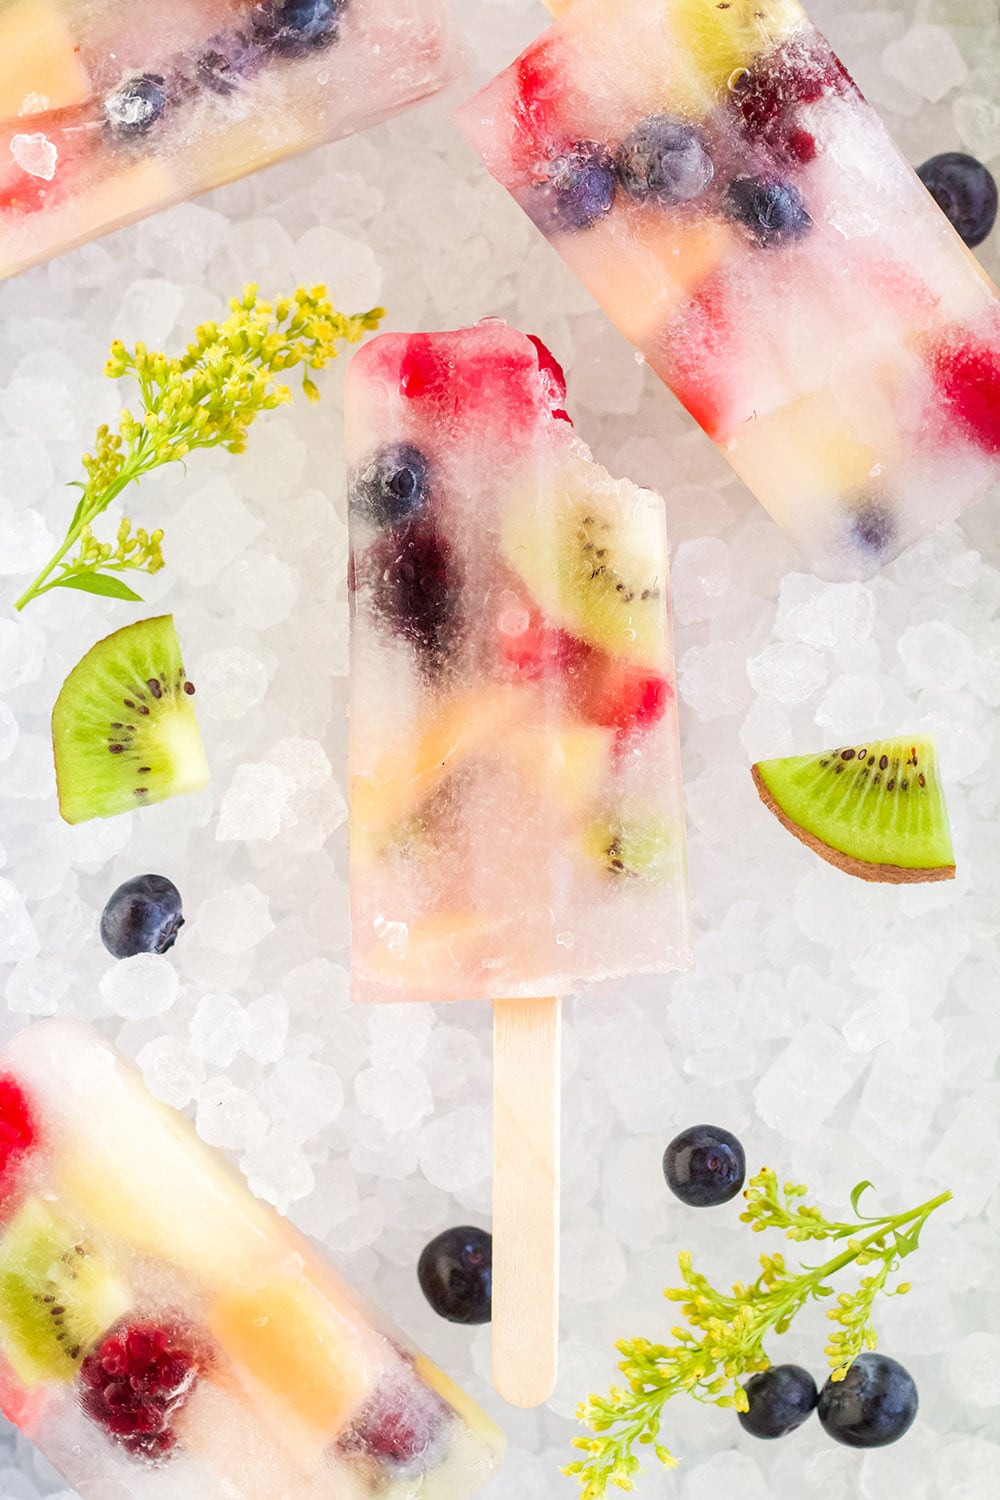 Rainbow fruit pops on ice with fresh fruit pieces.